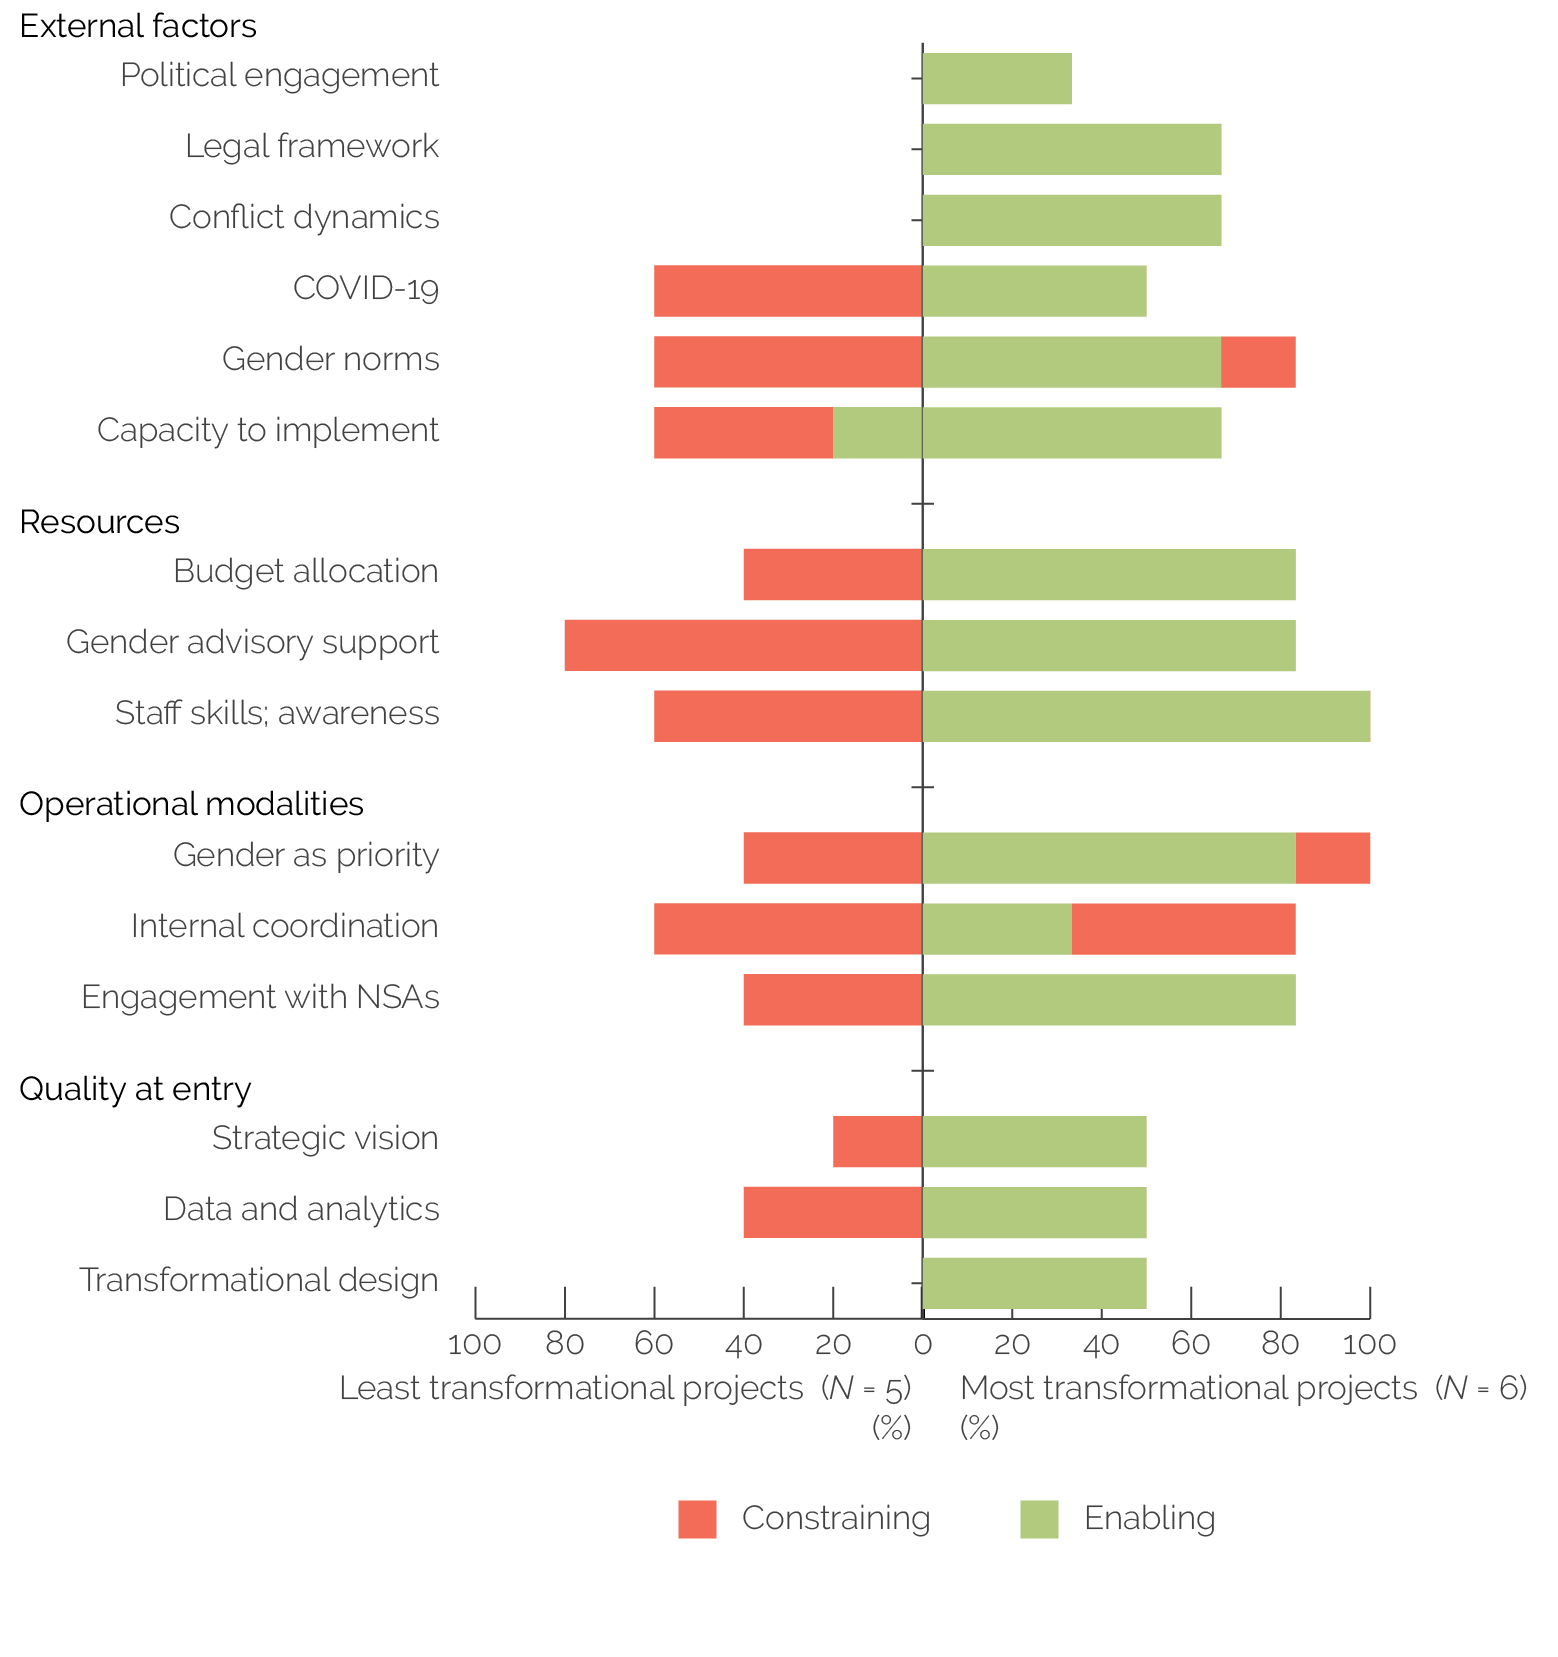 A bar graph displaying enabling and constraining factors to achieve transformational change for the worst and best project designs.